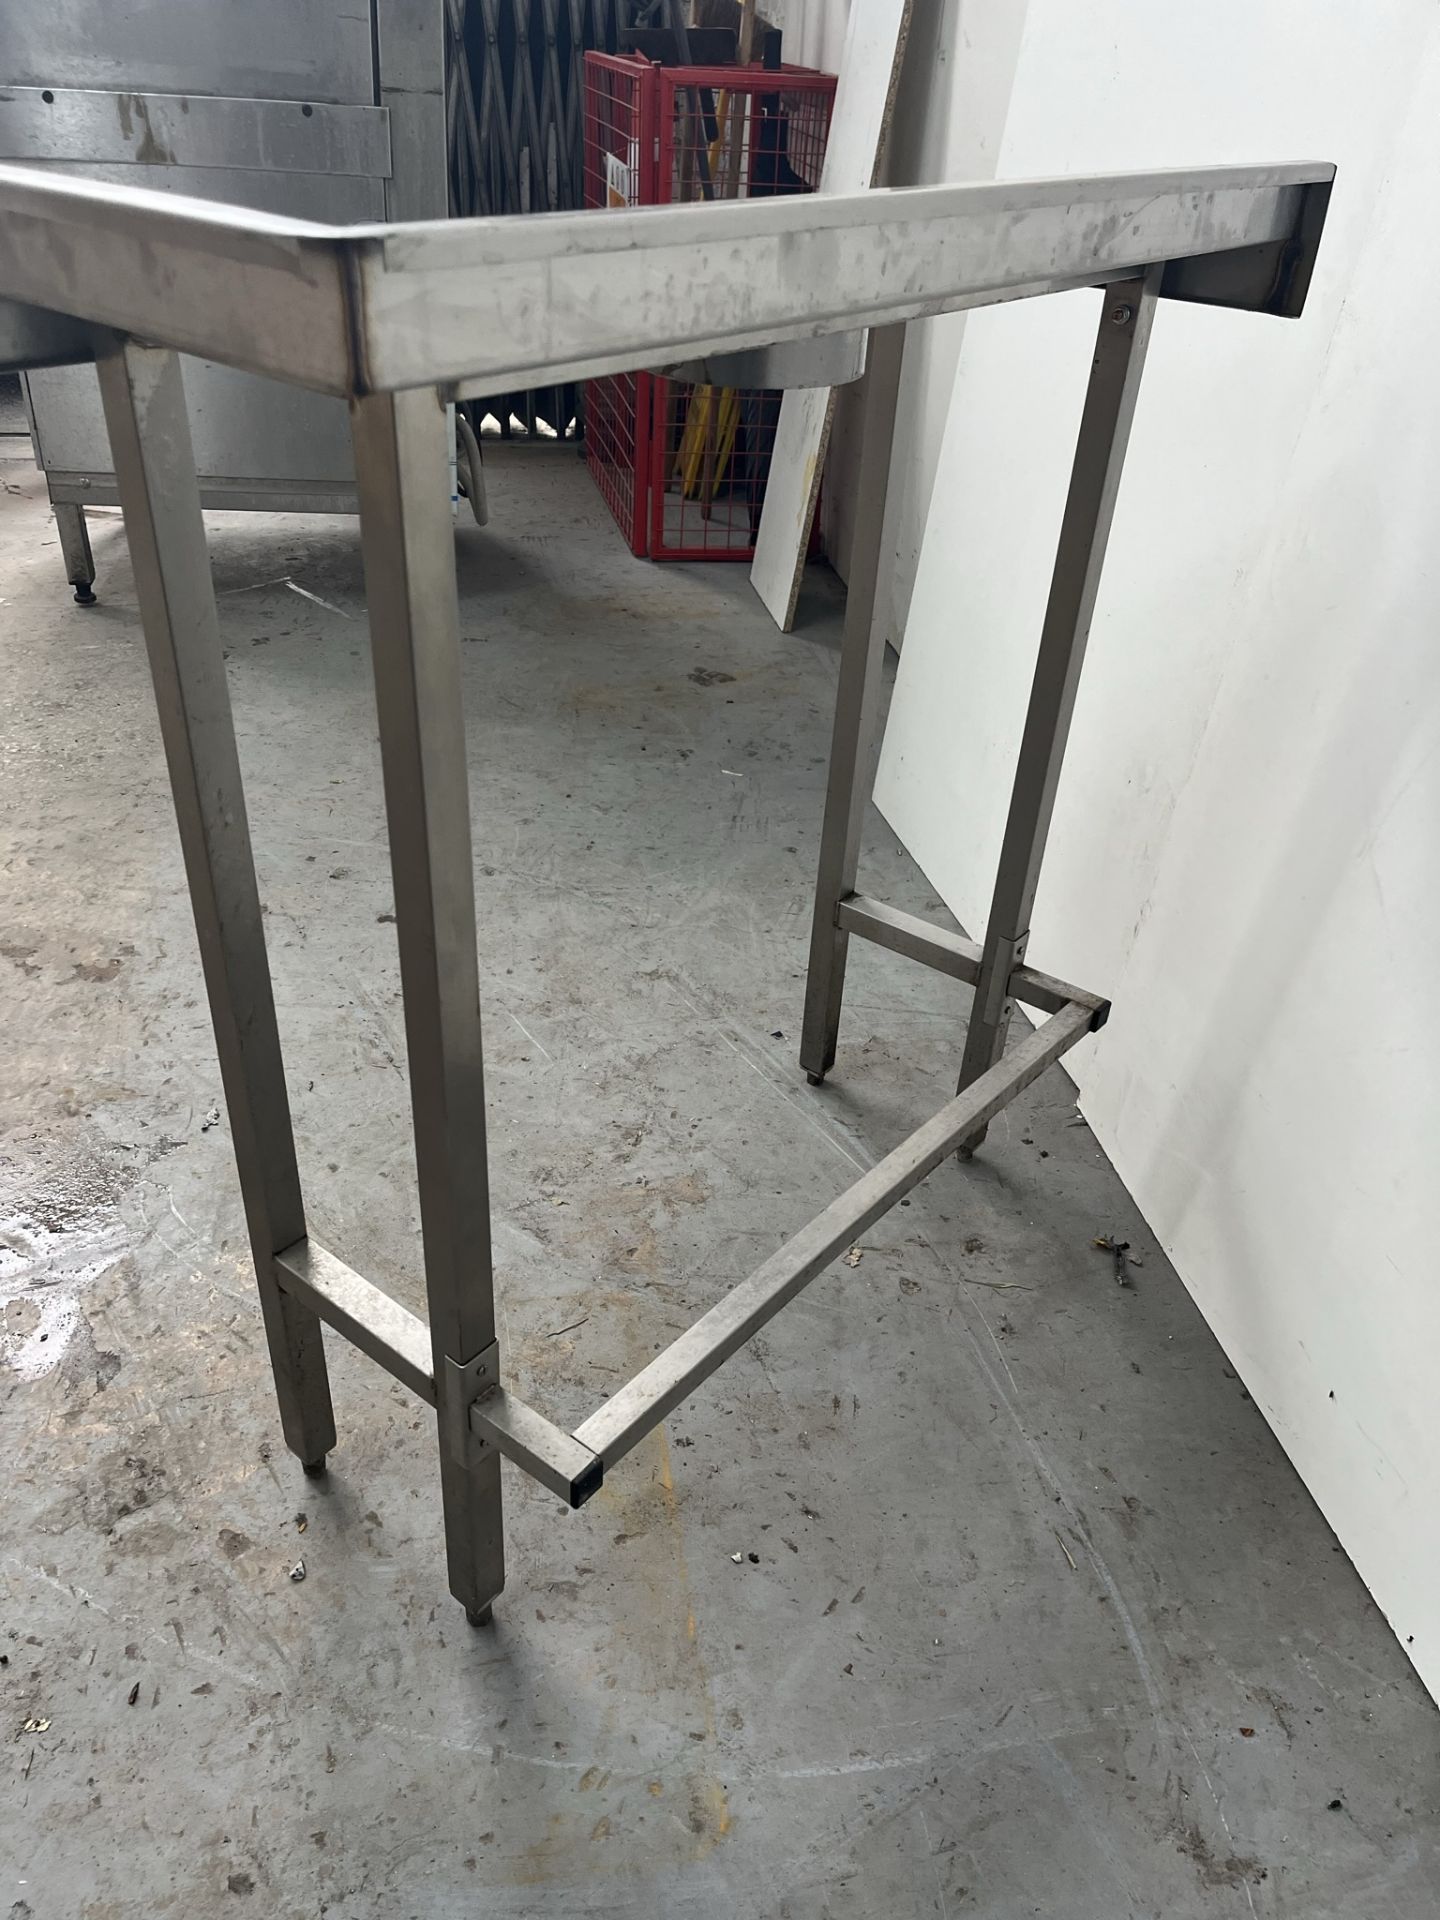 850mm Stainless Steel Catering Preperation Table With Waste Disposal Hole - Image 5 of 7